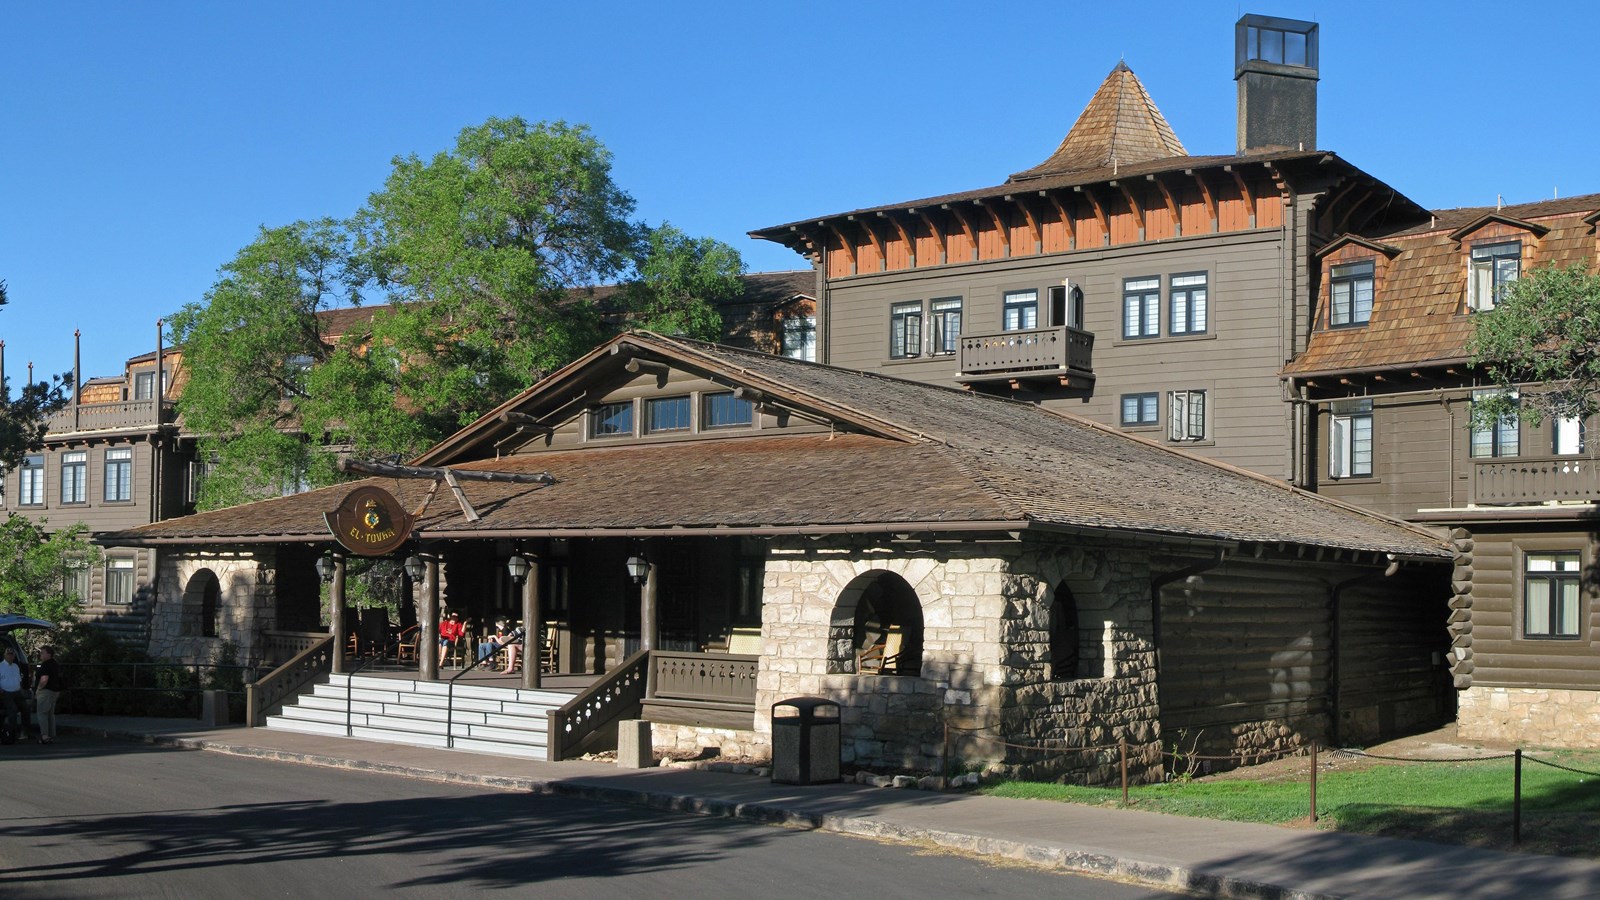 The El Tovar Hotel modeled after a Swiss Chalet stands prominently at the edge of the Grand Canyon